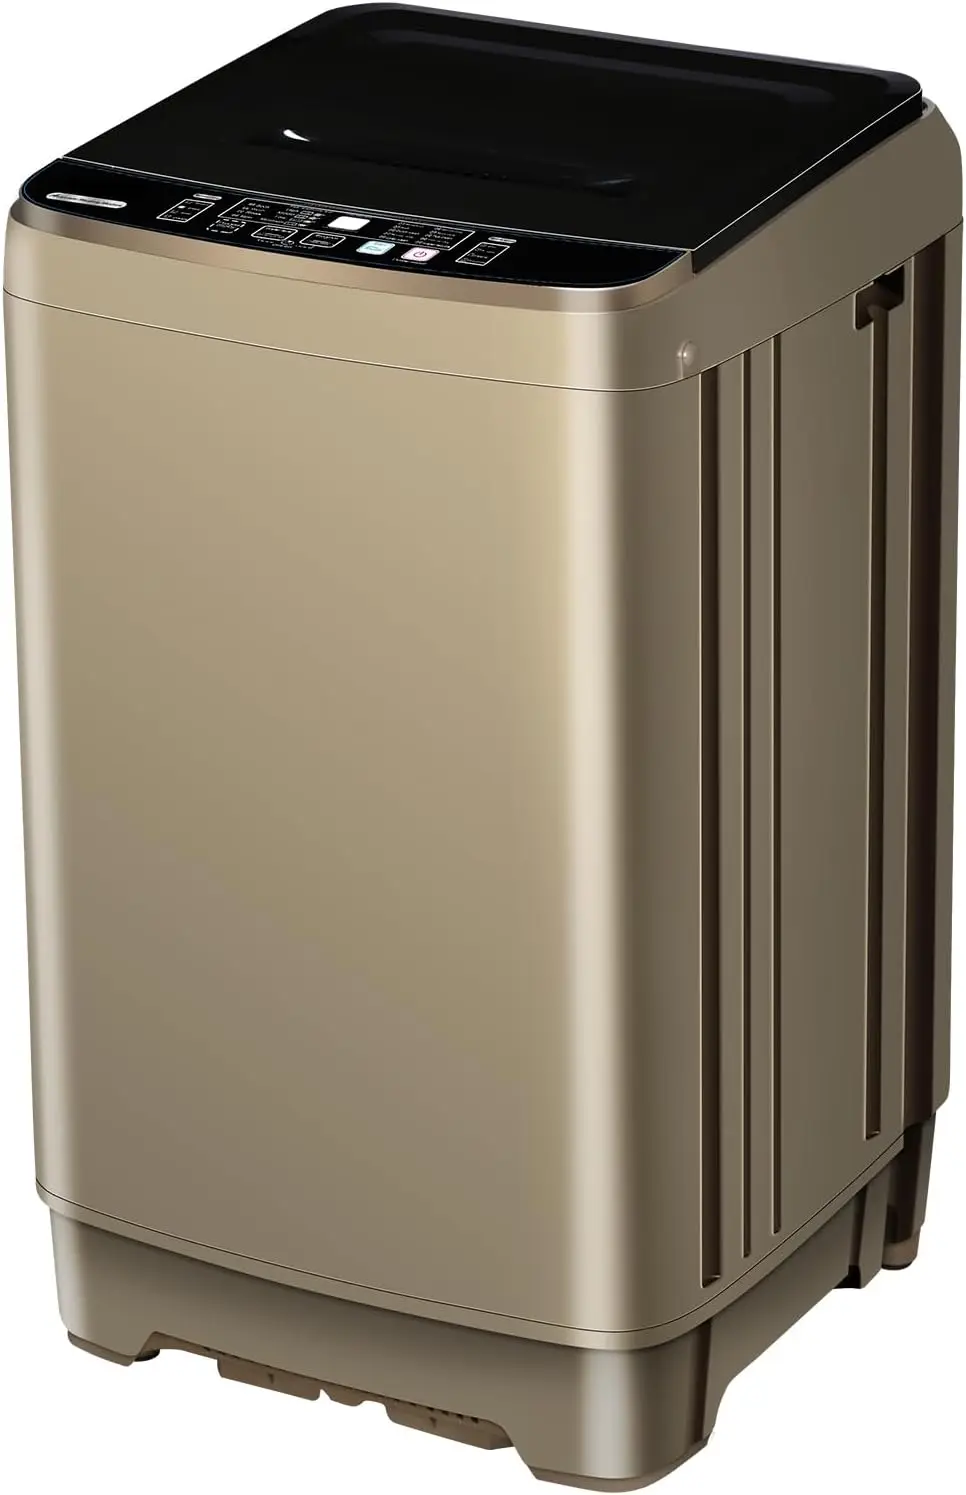  automatic washing machine 15 6lbs portable compact laundry washer with drain pump gold thumb200